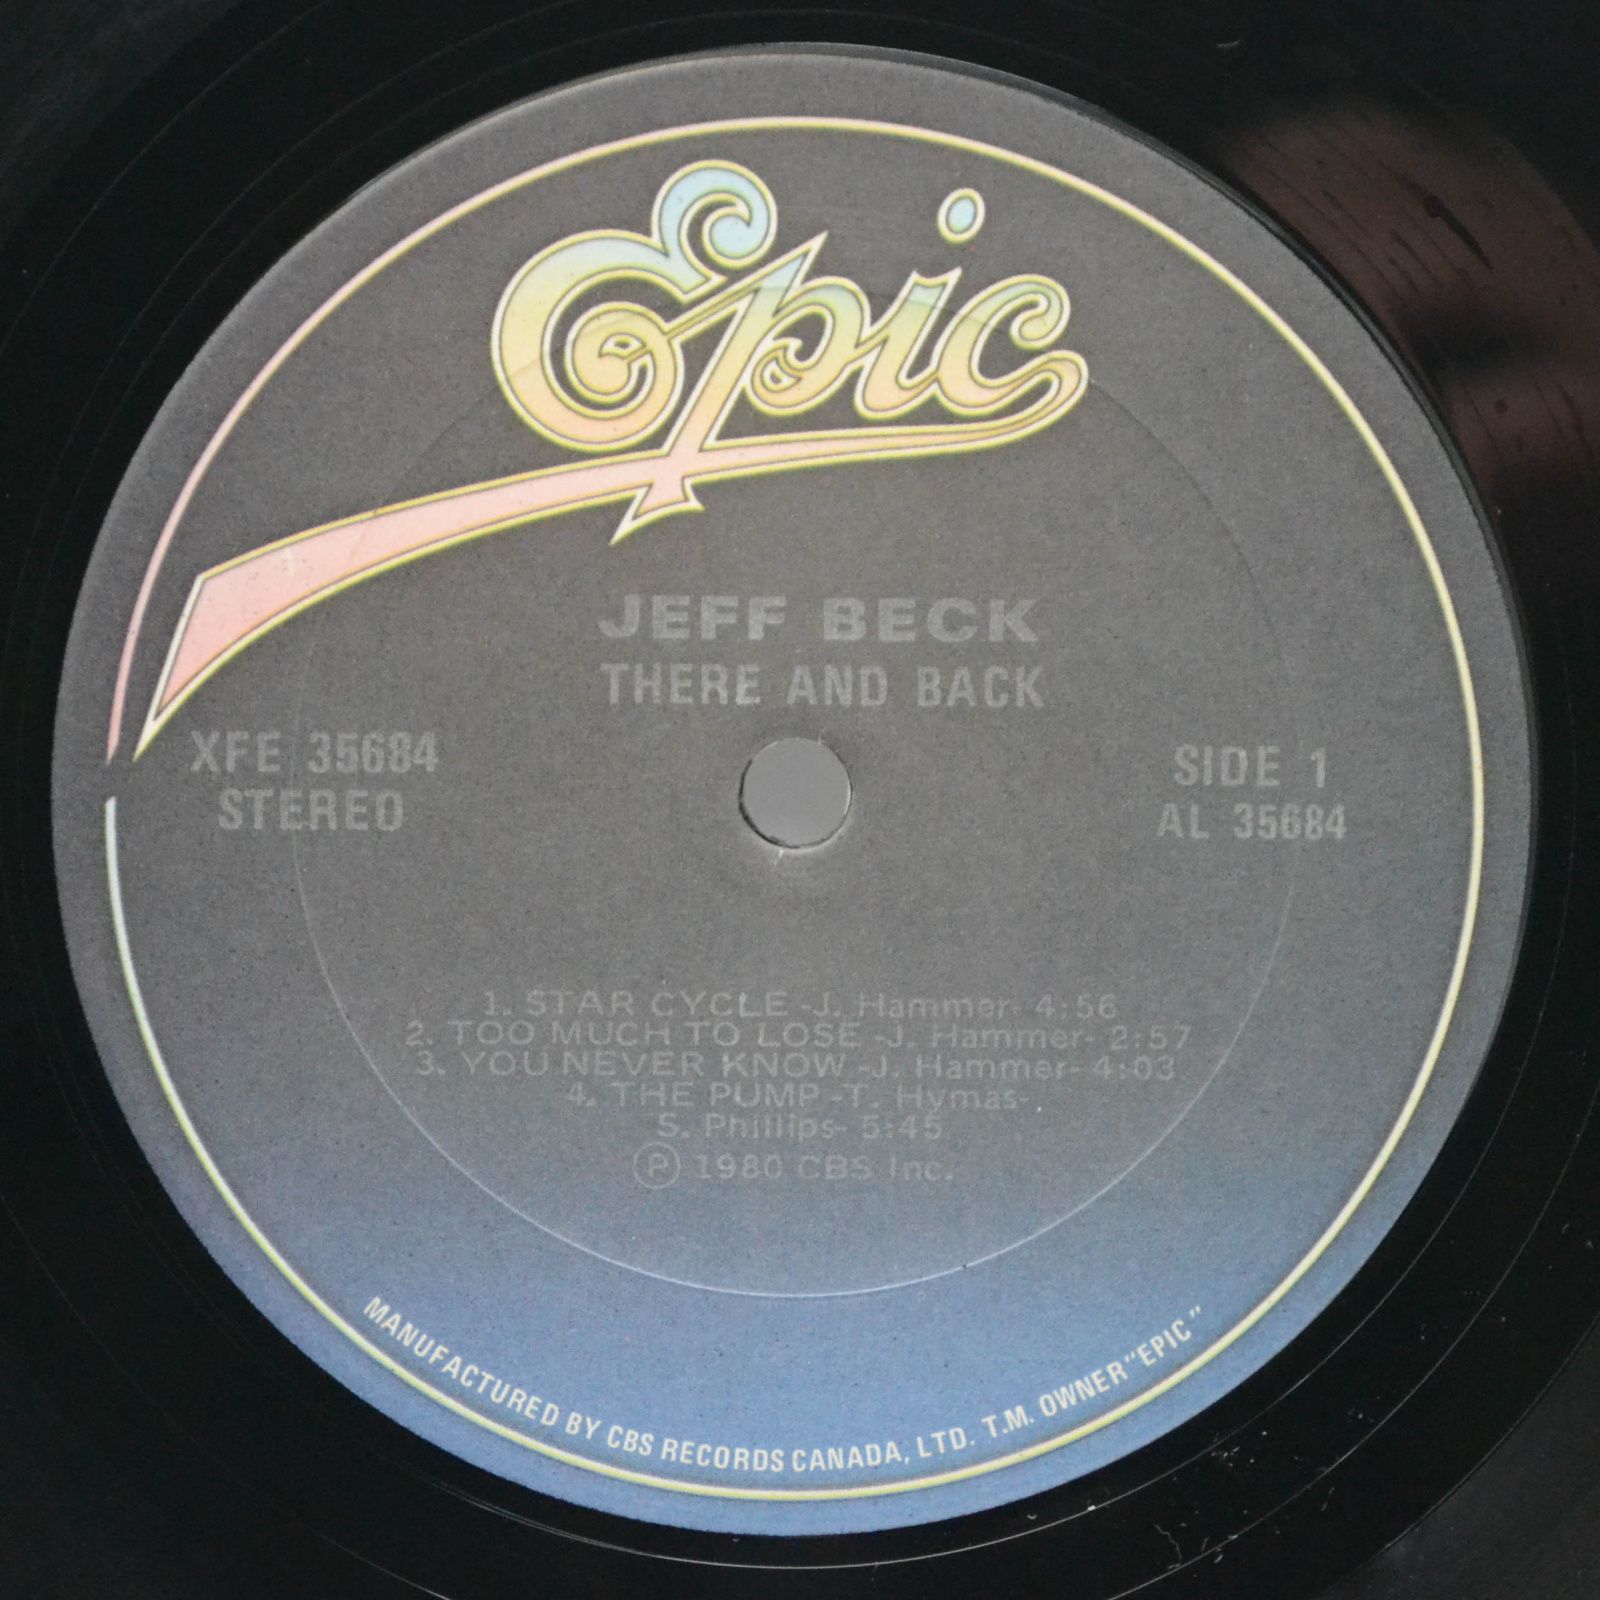 Jeff Beck — There And Back, 1980